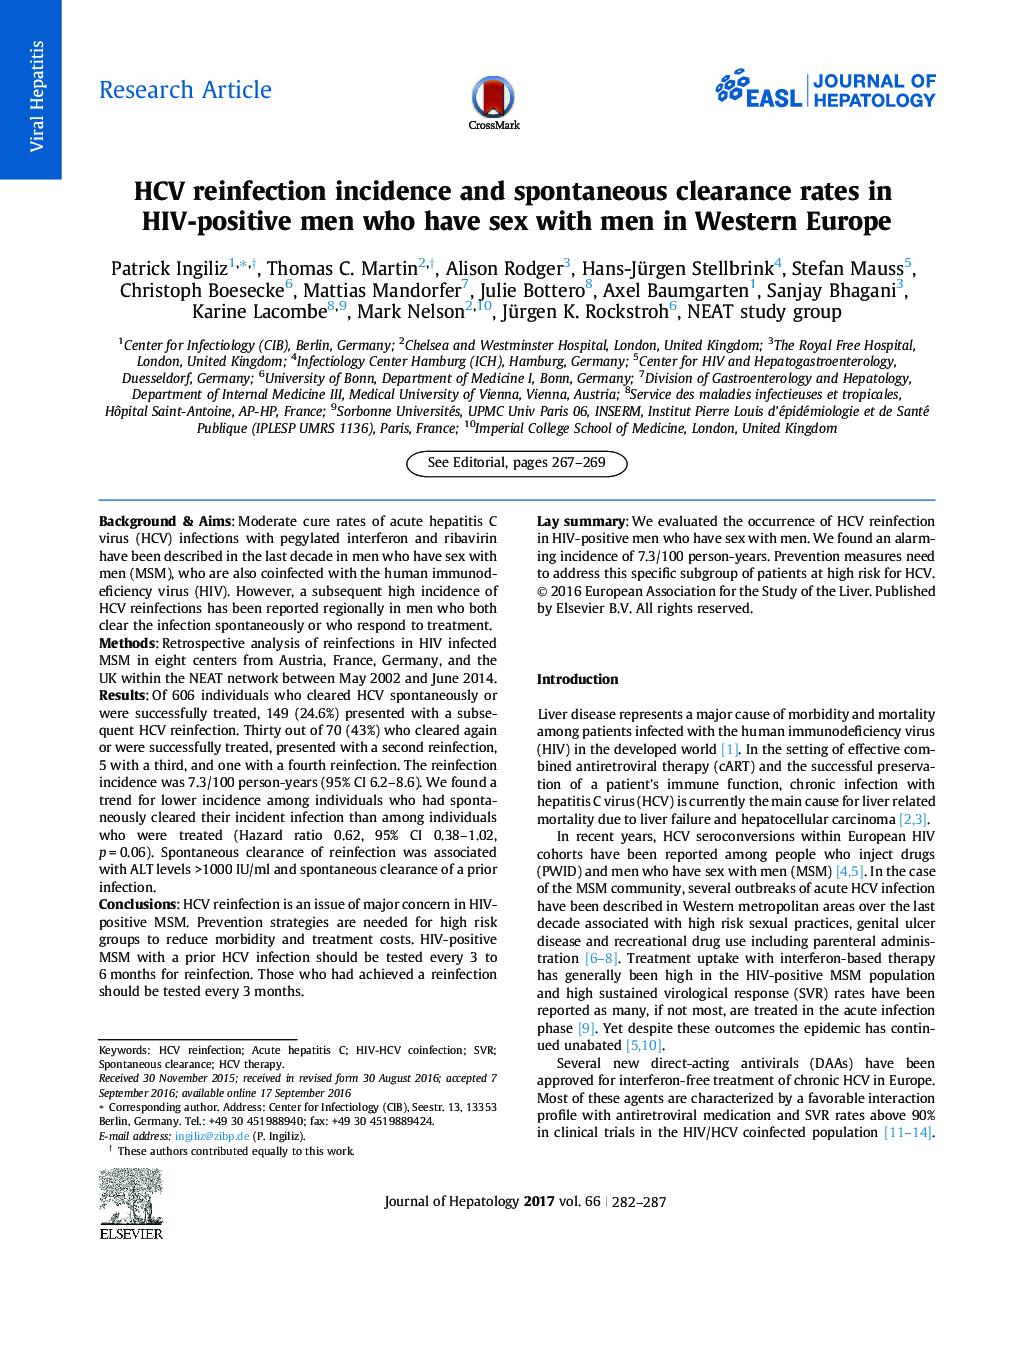 HCV reinfection incidence and spontaneous clearance rates in HIV-positive men who have sex with men in Western Europe